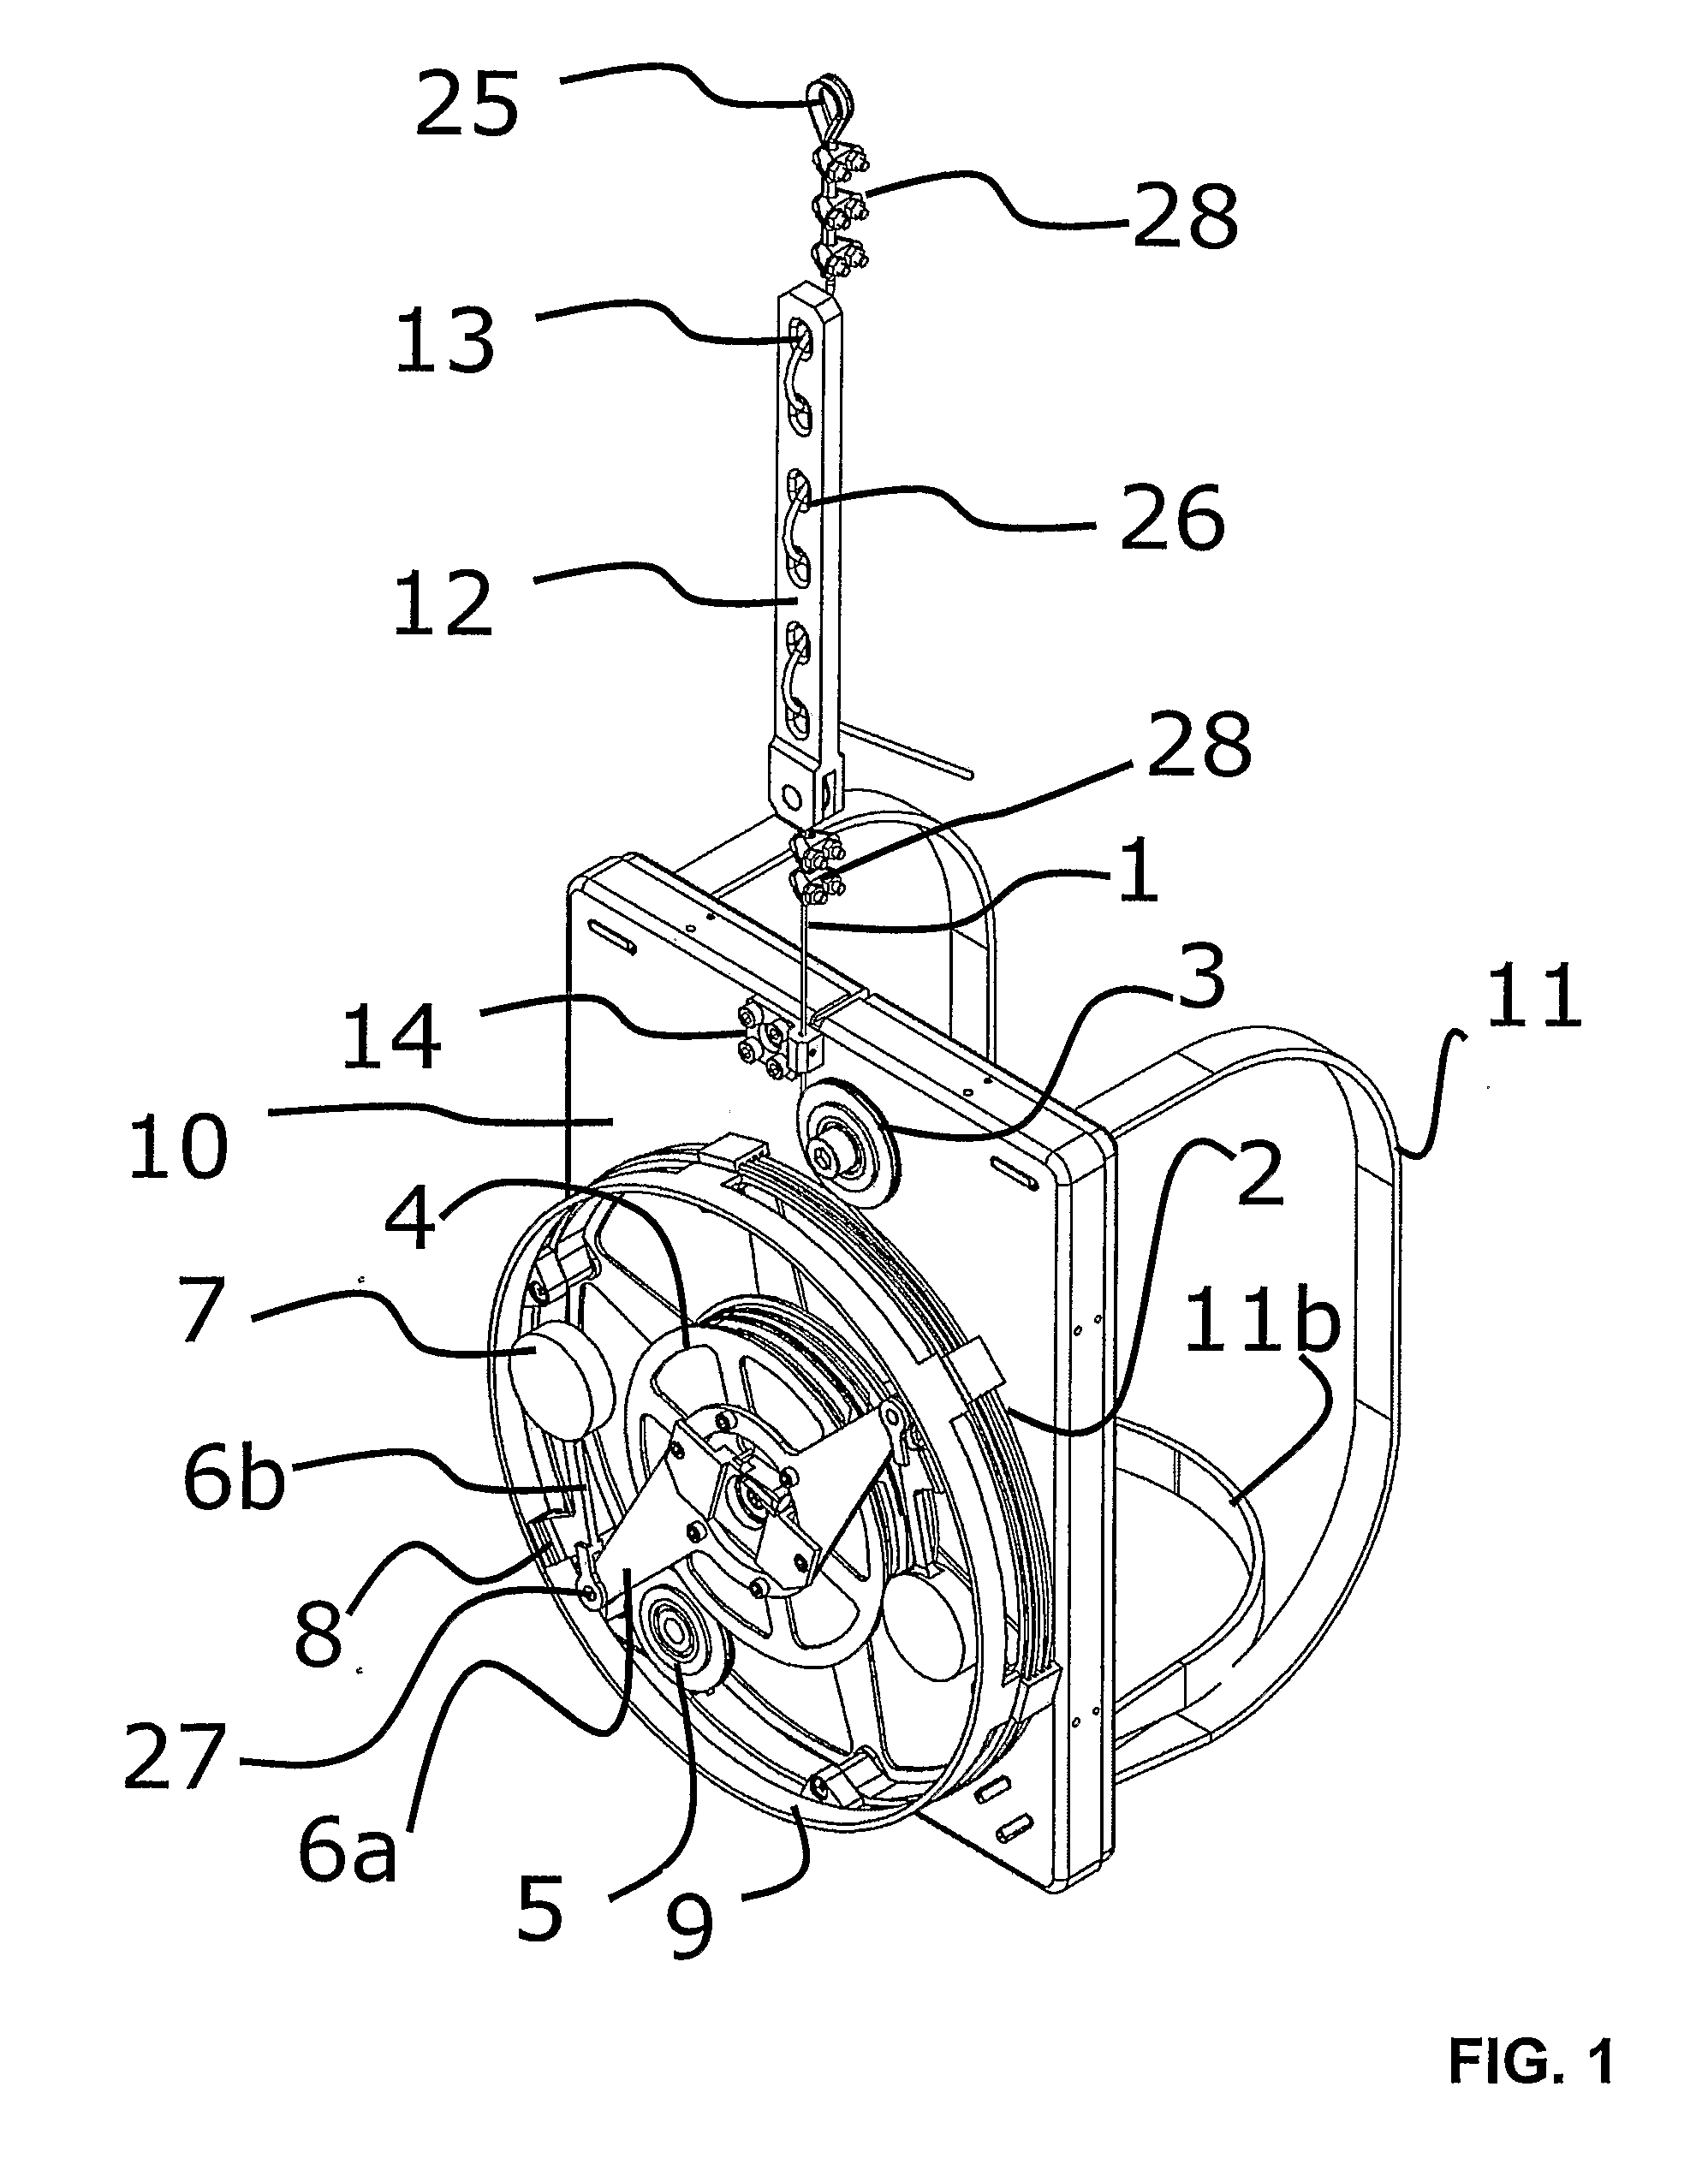 Portable Apparatus for Controlled Descent